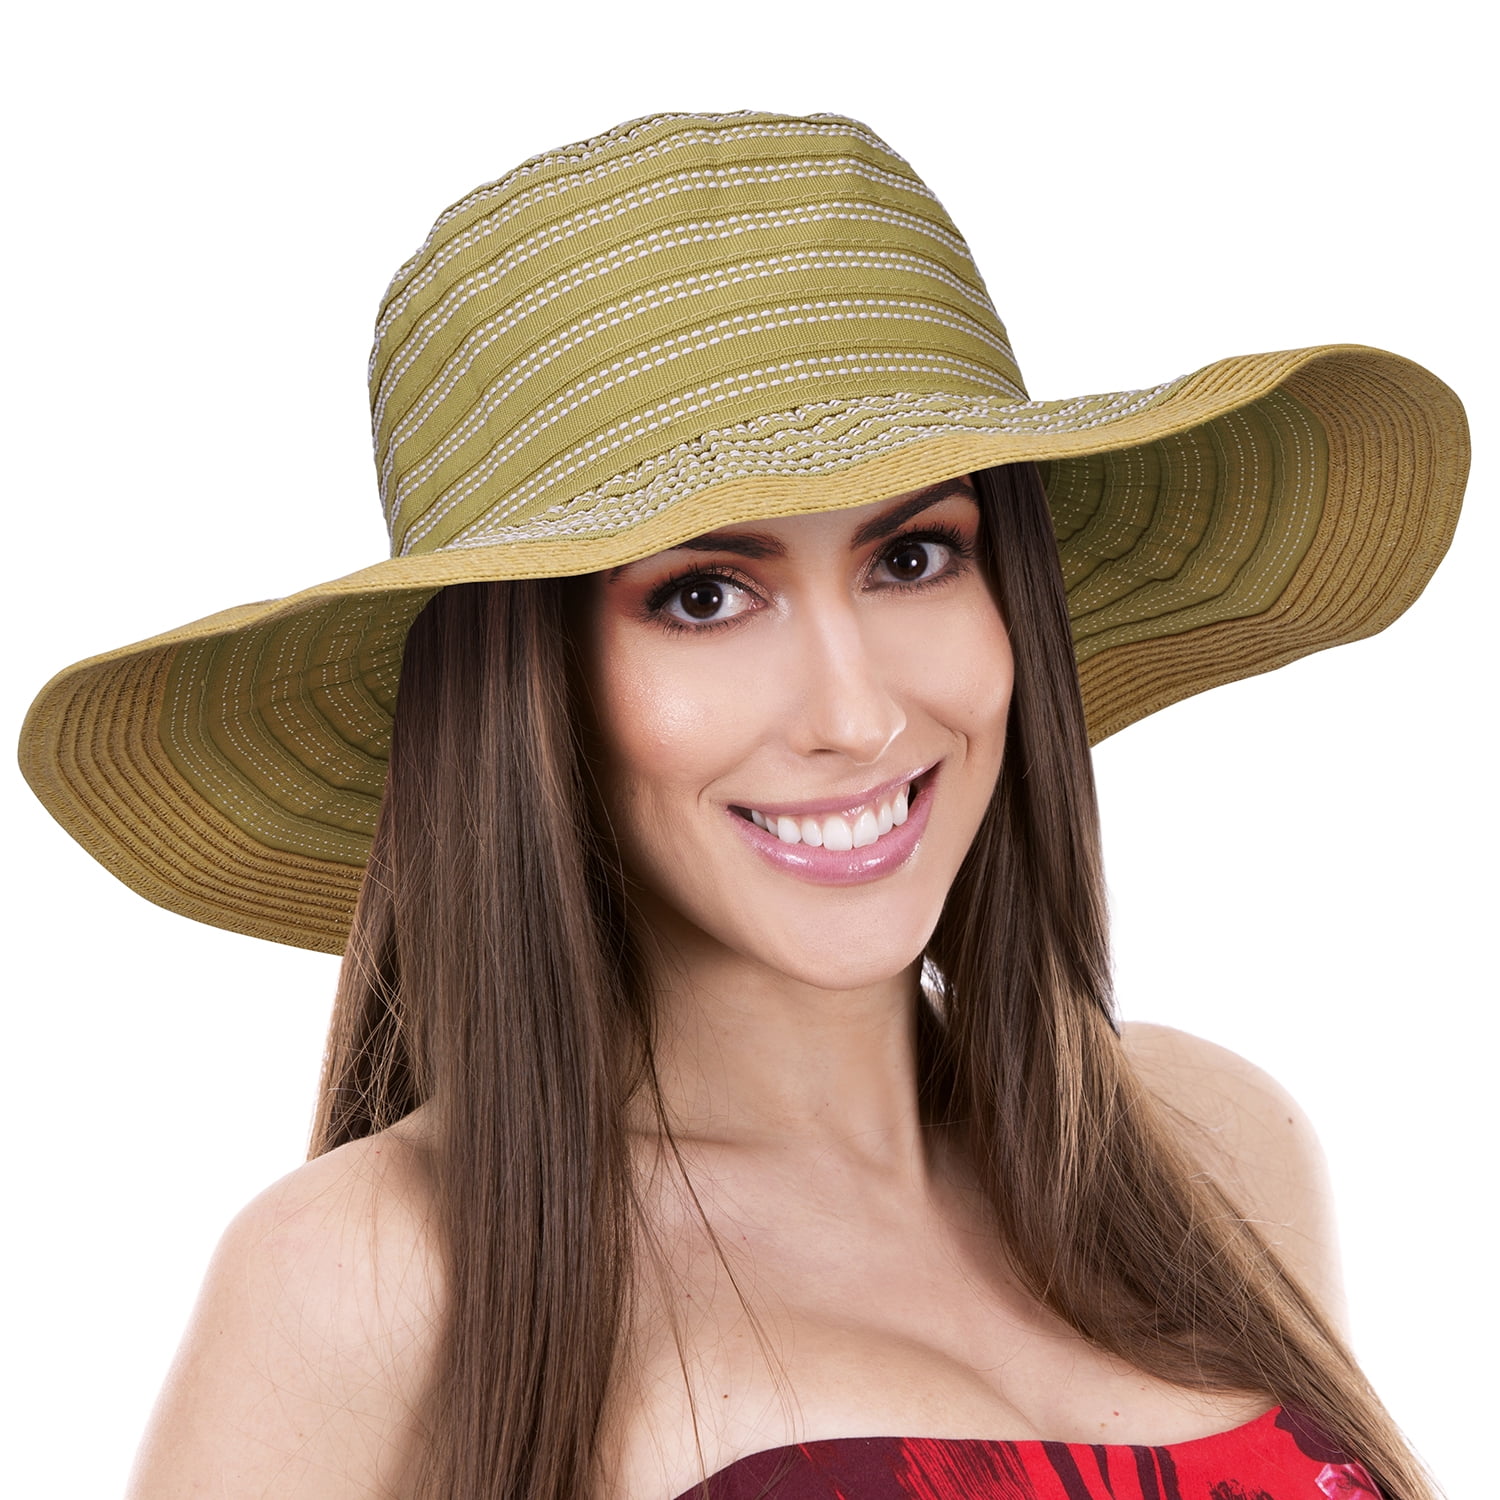 Weshiny Summer Wide Brim Sun Hat for Women Adjustable Hat with Chin Strap UPF 50 Sun Protection Hat Foldable Visor Hats